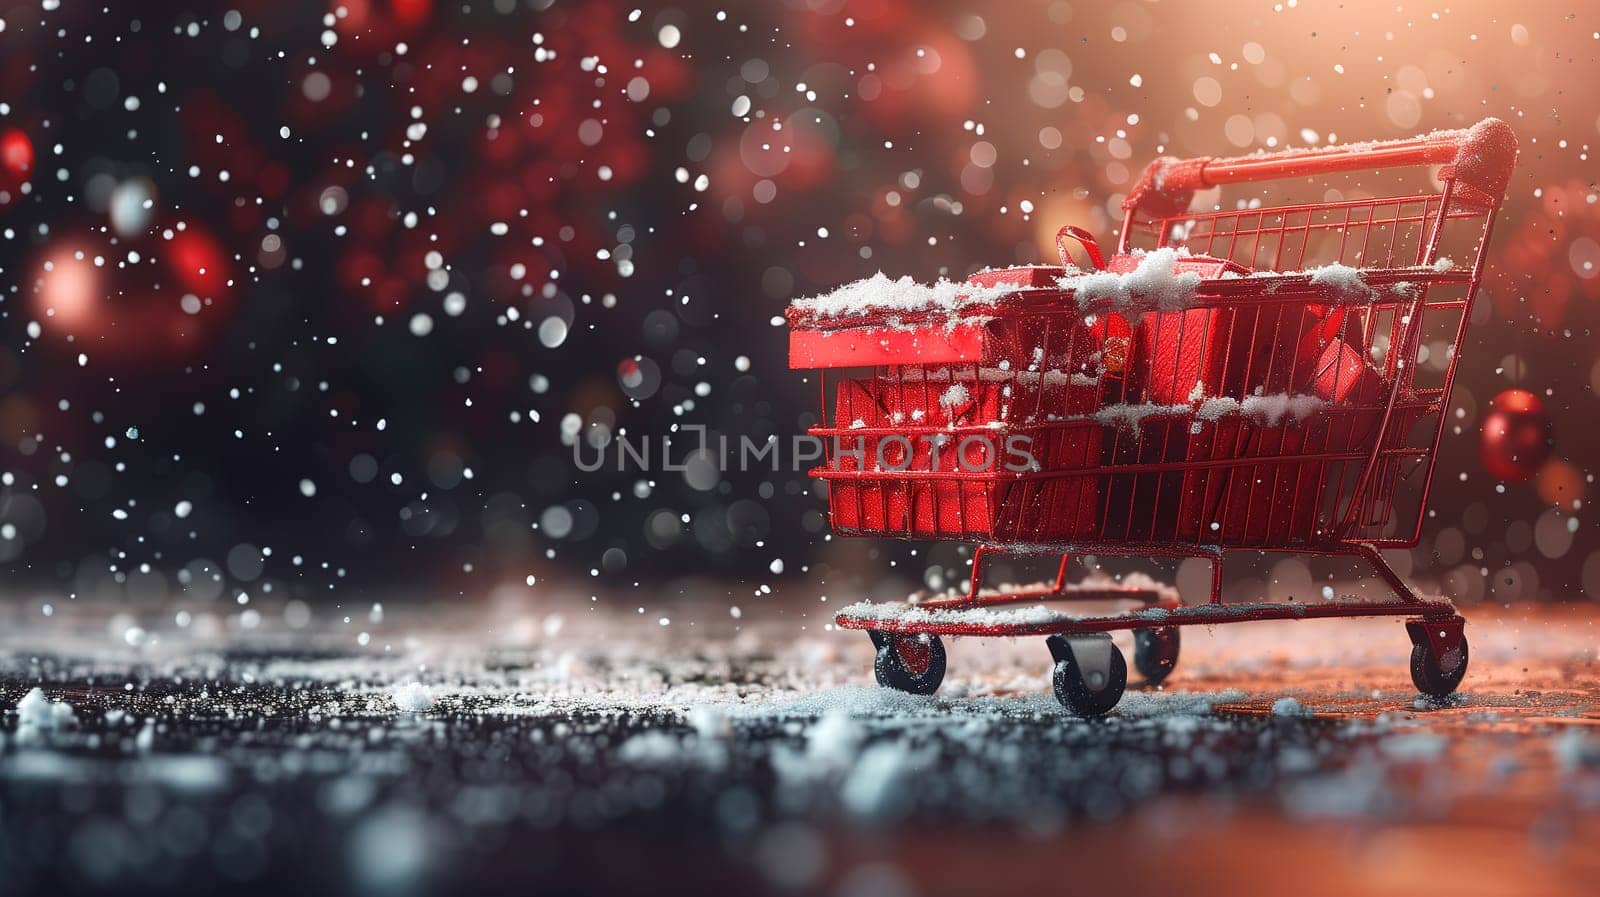 A red shopping cart stands out against the white snow in a parking lot, showcasing a contrast between the vibrant color and the wintry surroundings. The cart appears to be filled with items, hinting at a shopping trip on a cold day.